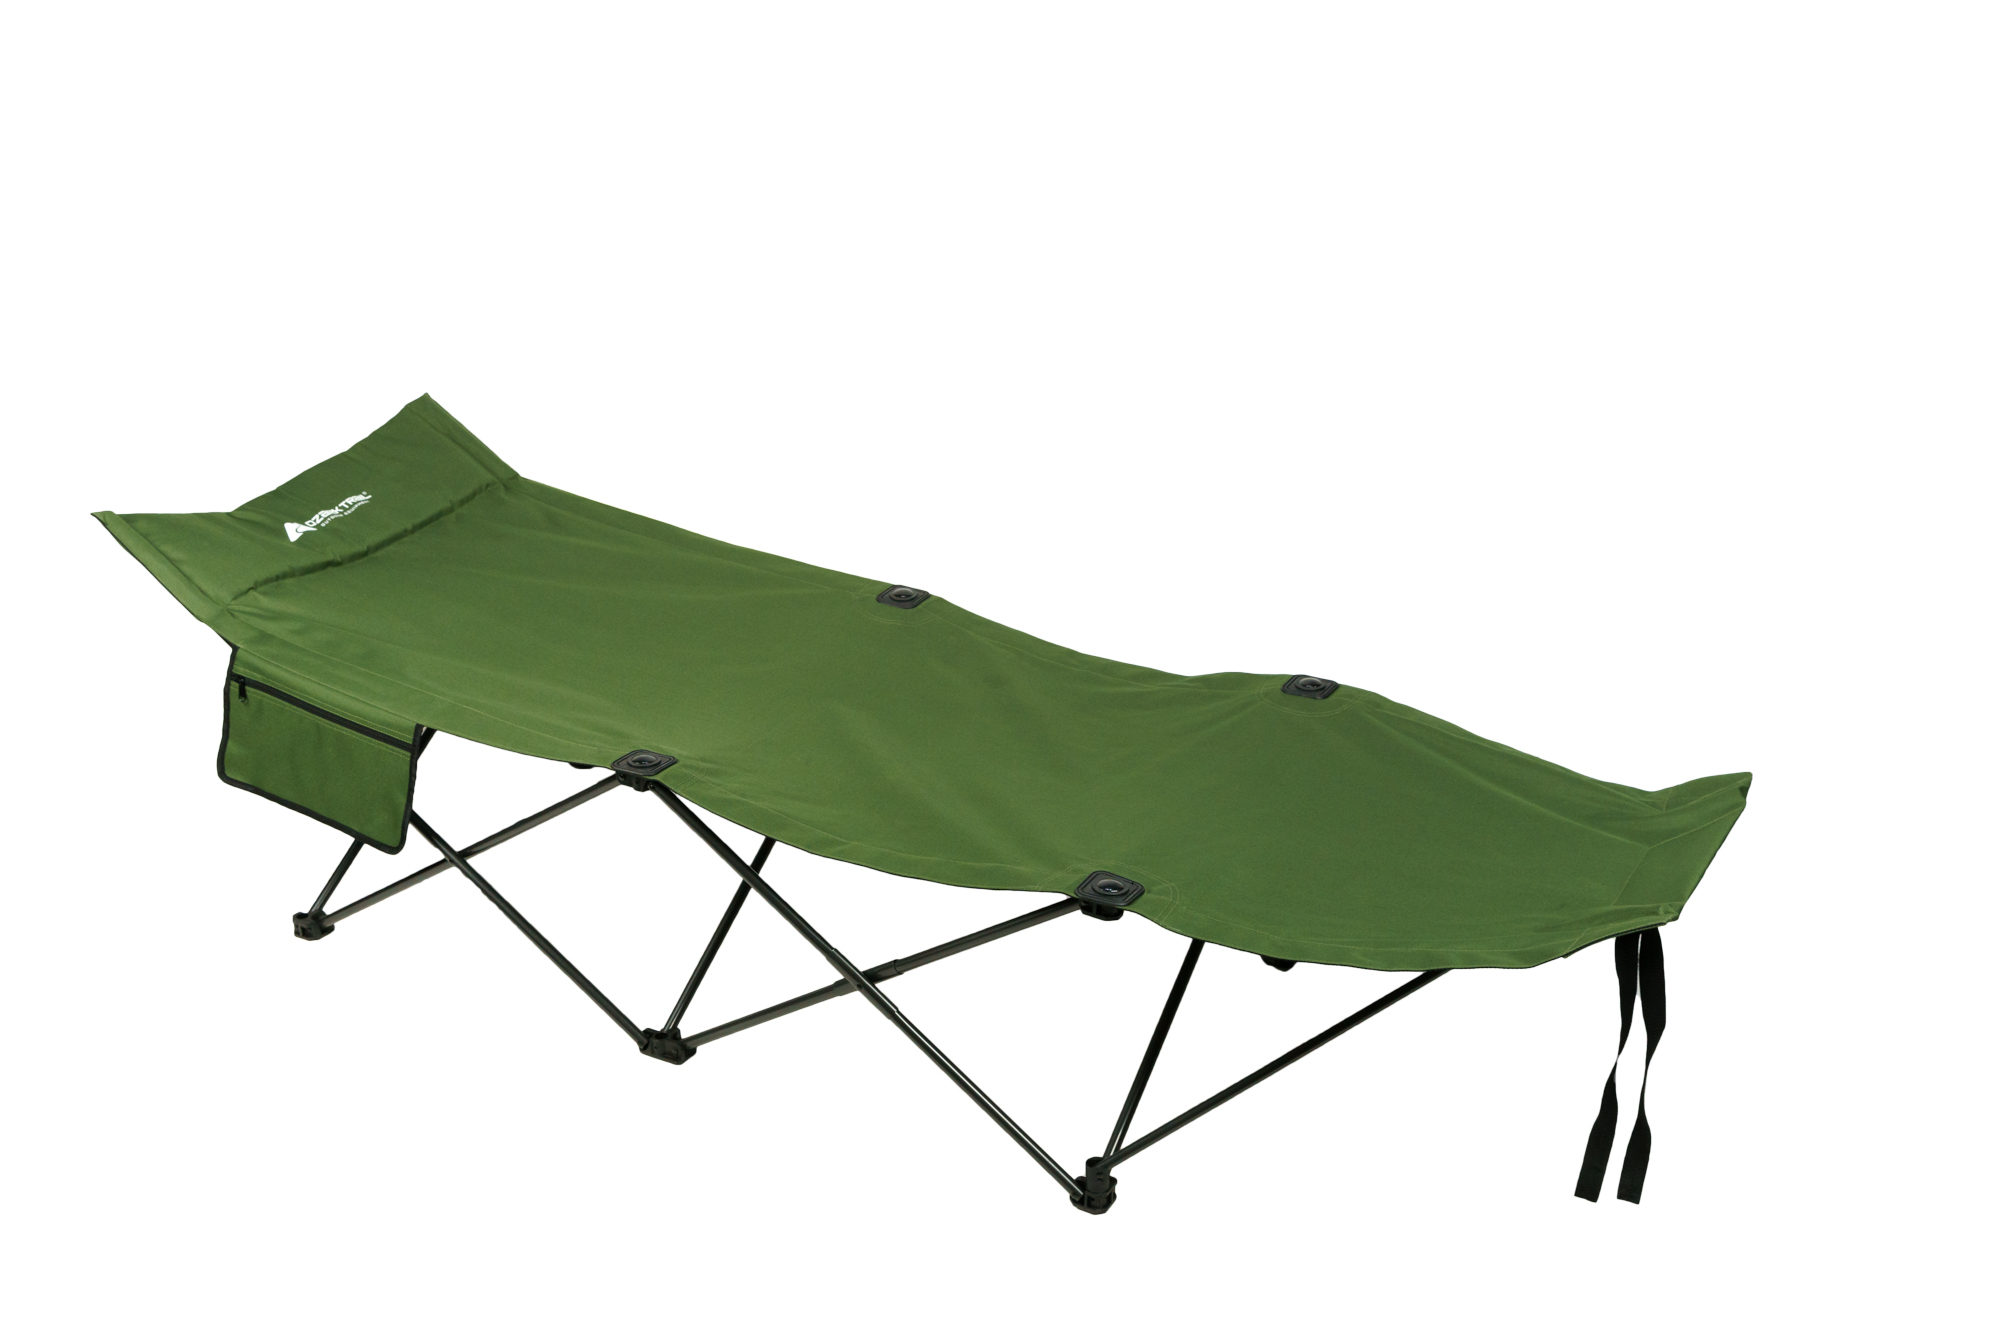 Ozark Trail Adult Camp Cot, Green, 80.2 inches x 30.2 inches x 23.5 inches - image 1 of 16